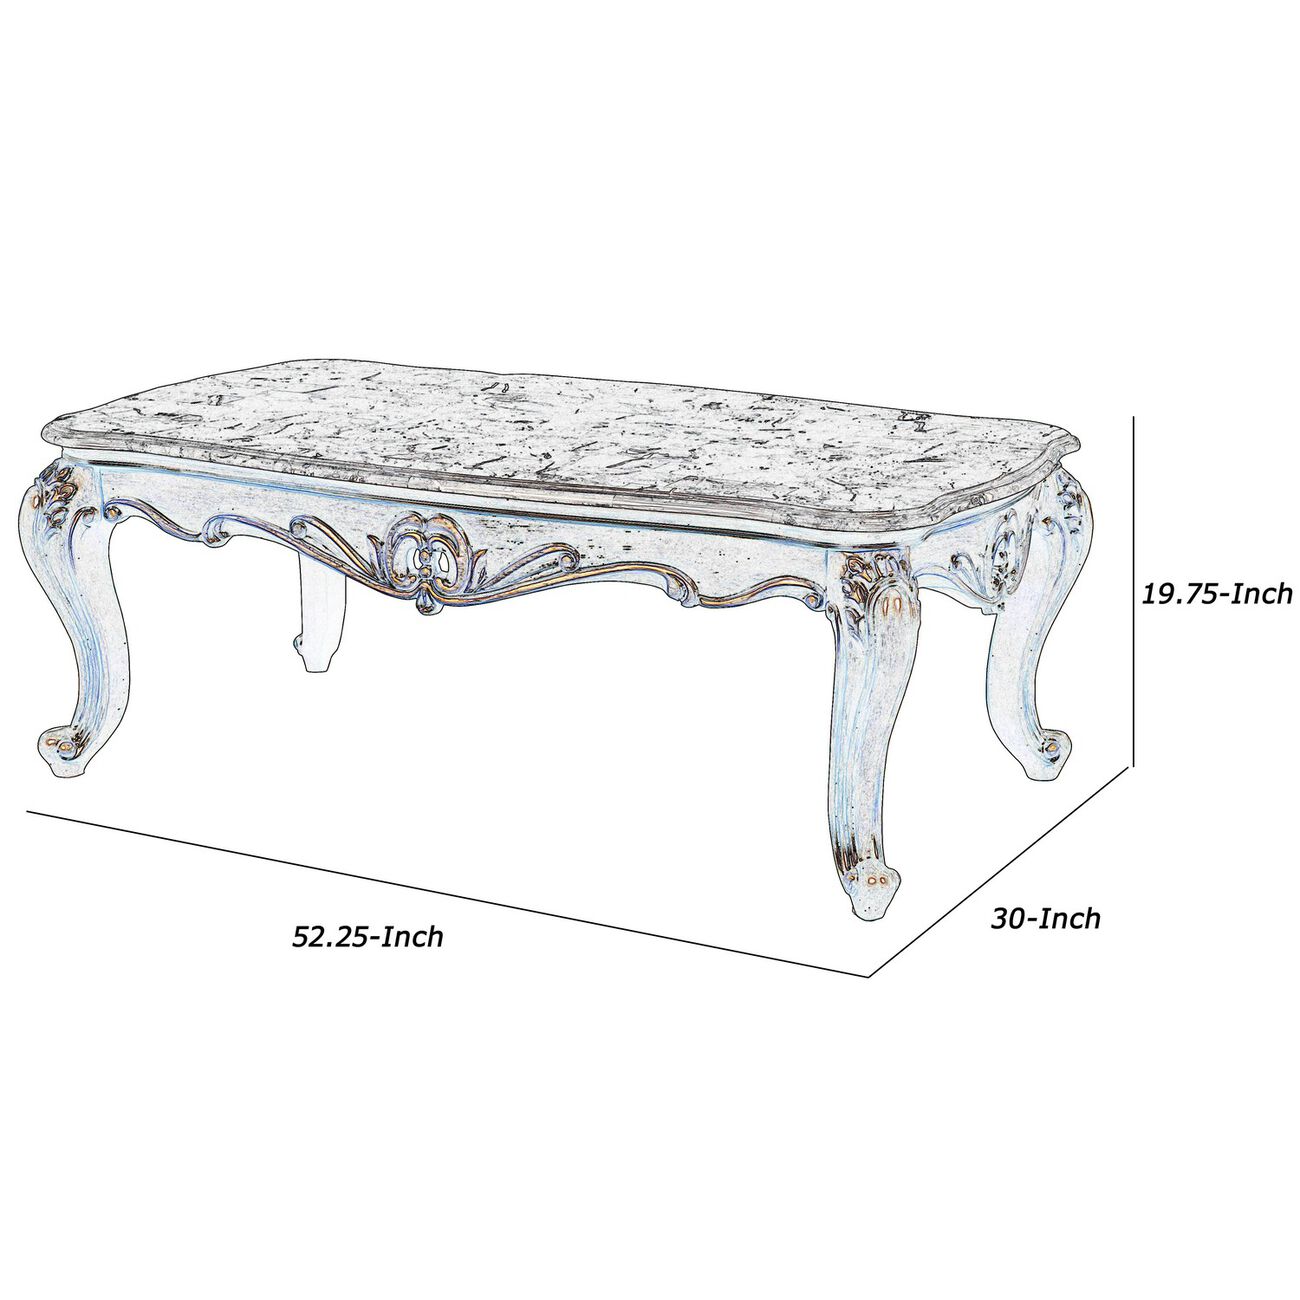 Wooden Cocktail Table with Marble Top and Carved Details, Gray and Brown